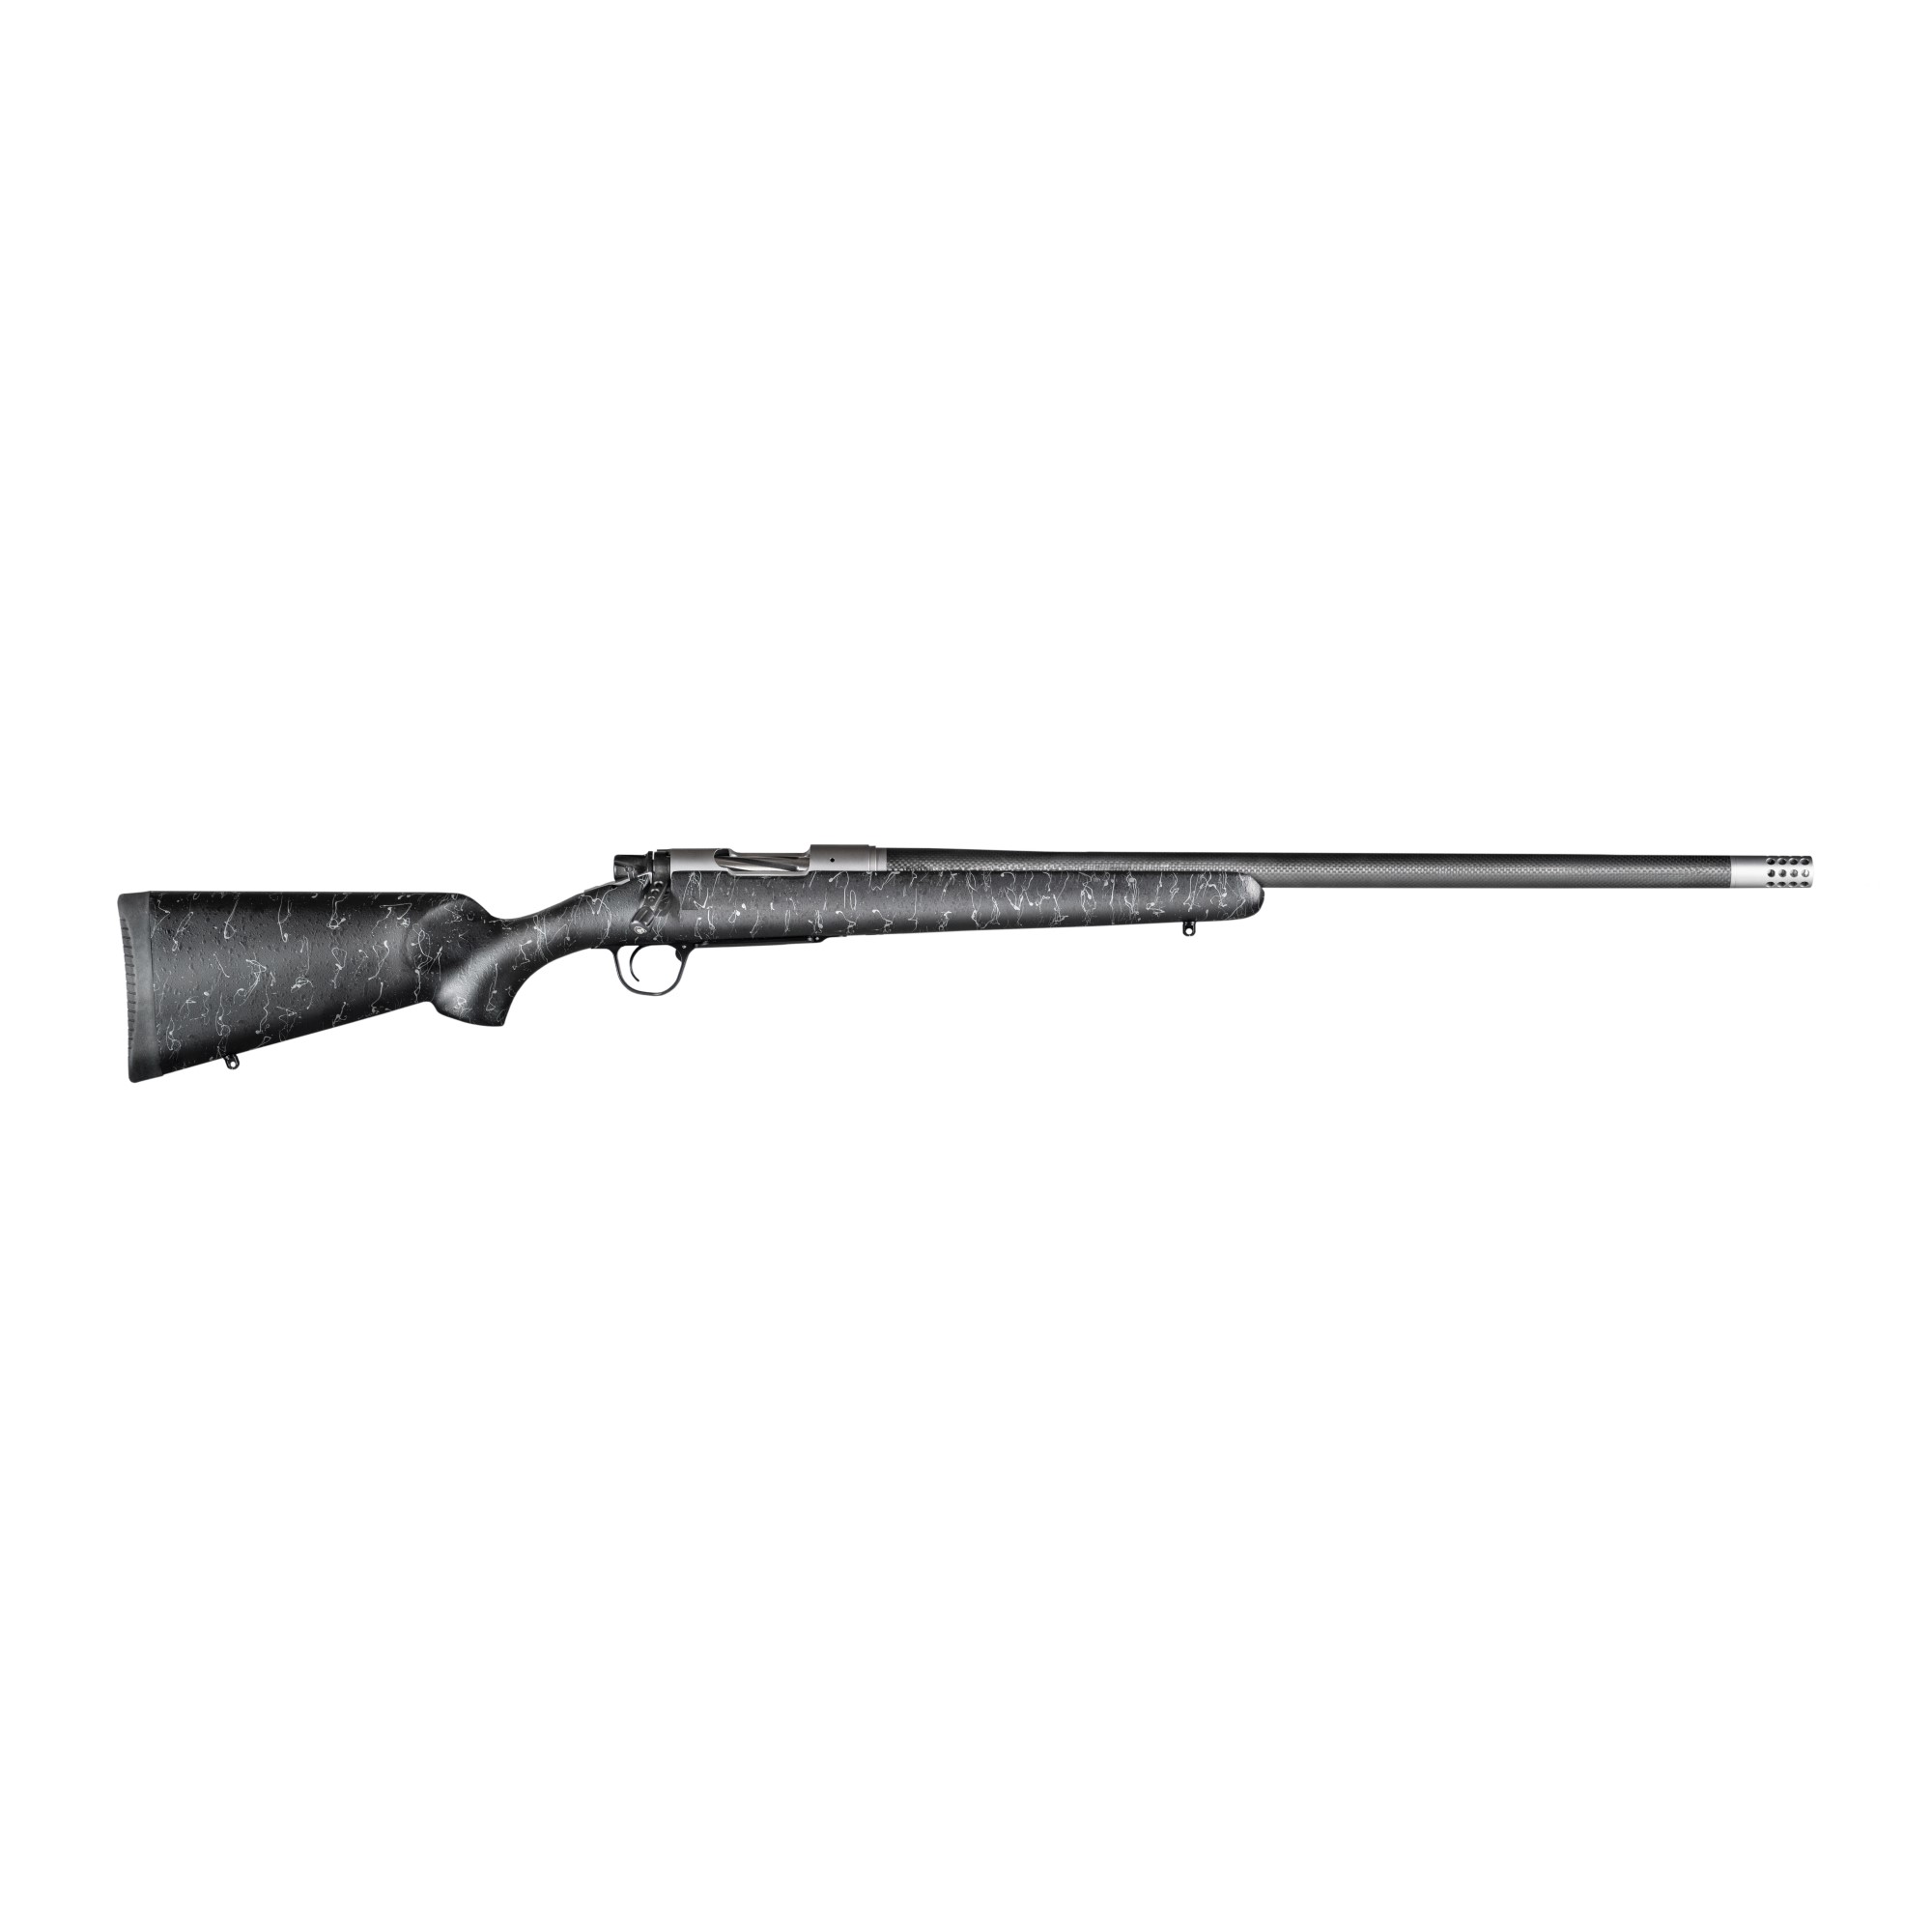 M12 BOLT-ACTION RIFLE, EXTREME NO SITES - .270 WIN